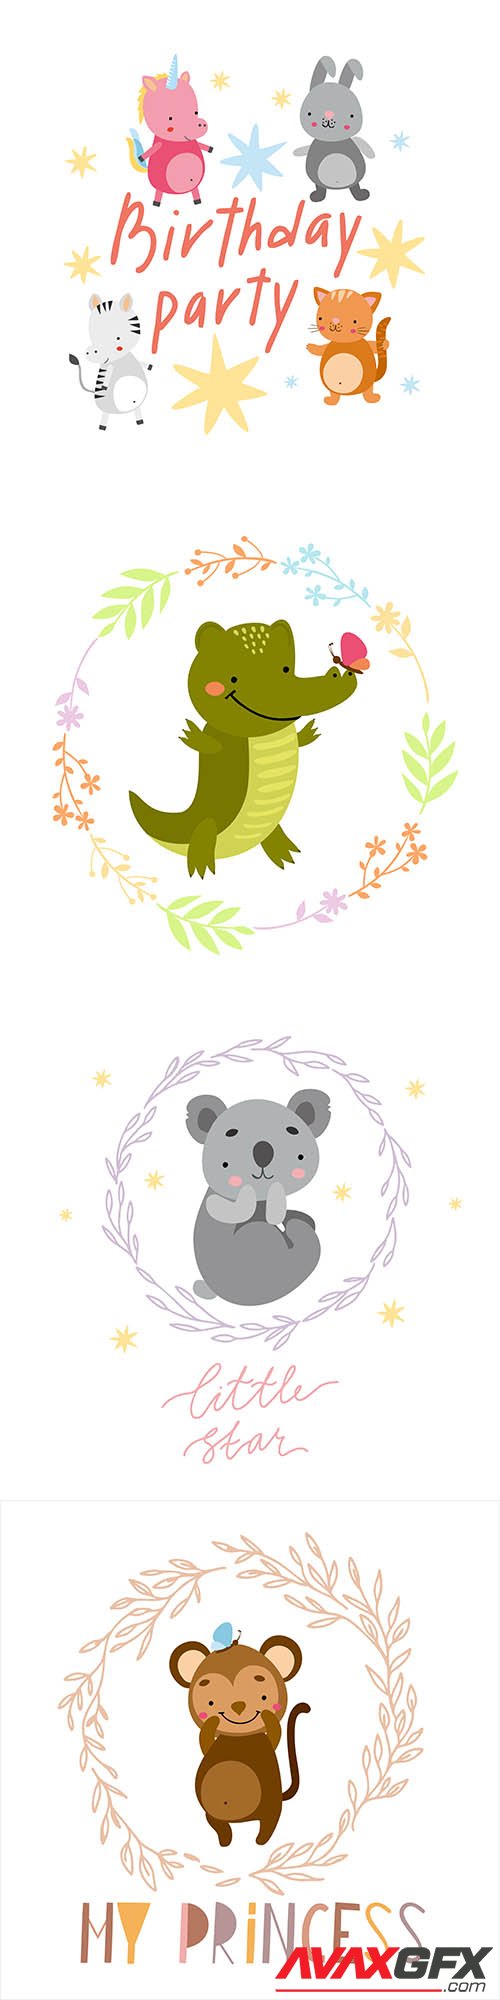 Birthday party illustrations with animals